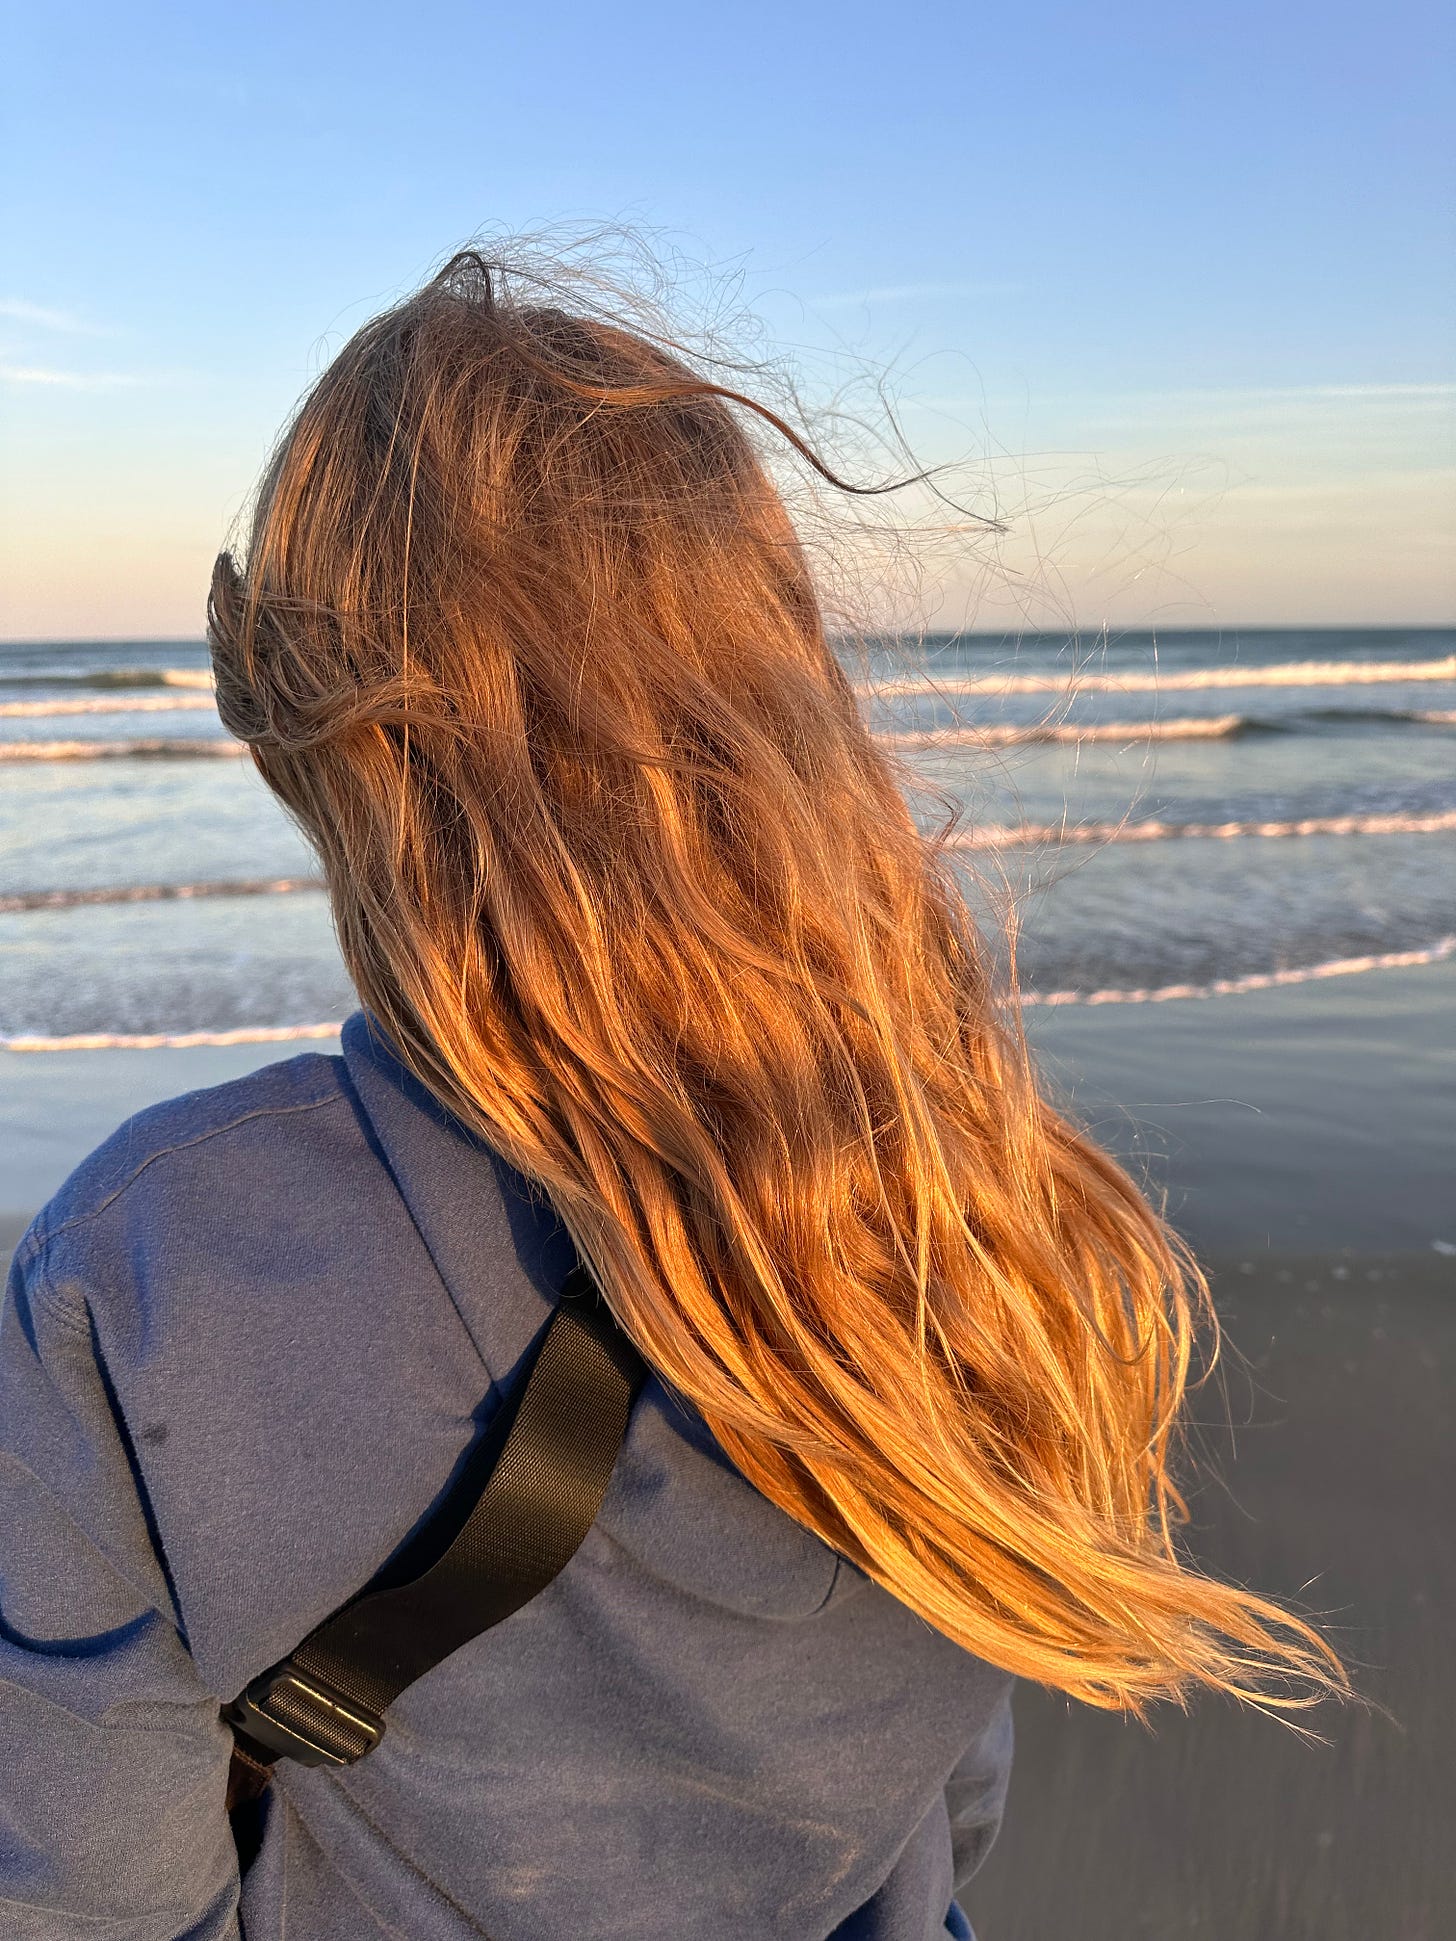 My daughter at Padre Island, backlit by the golden hour